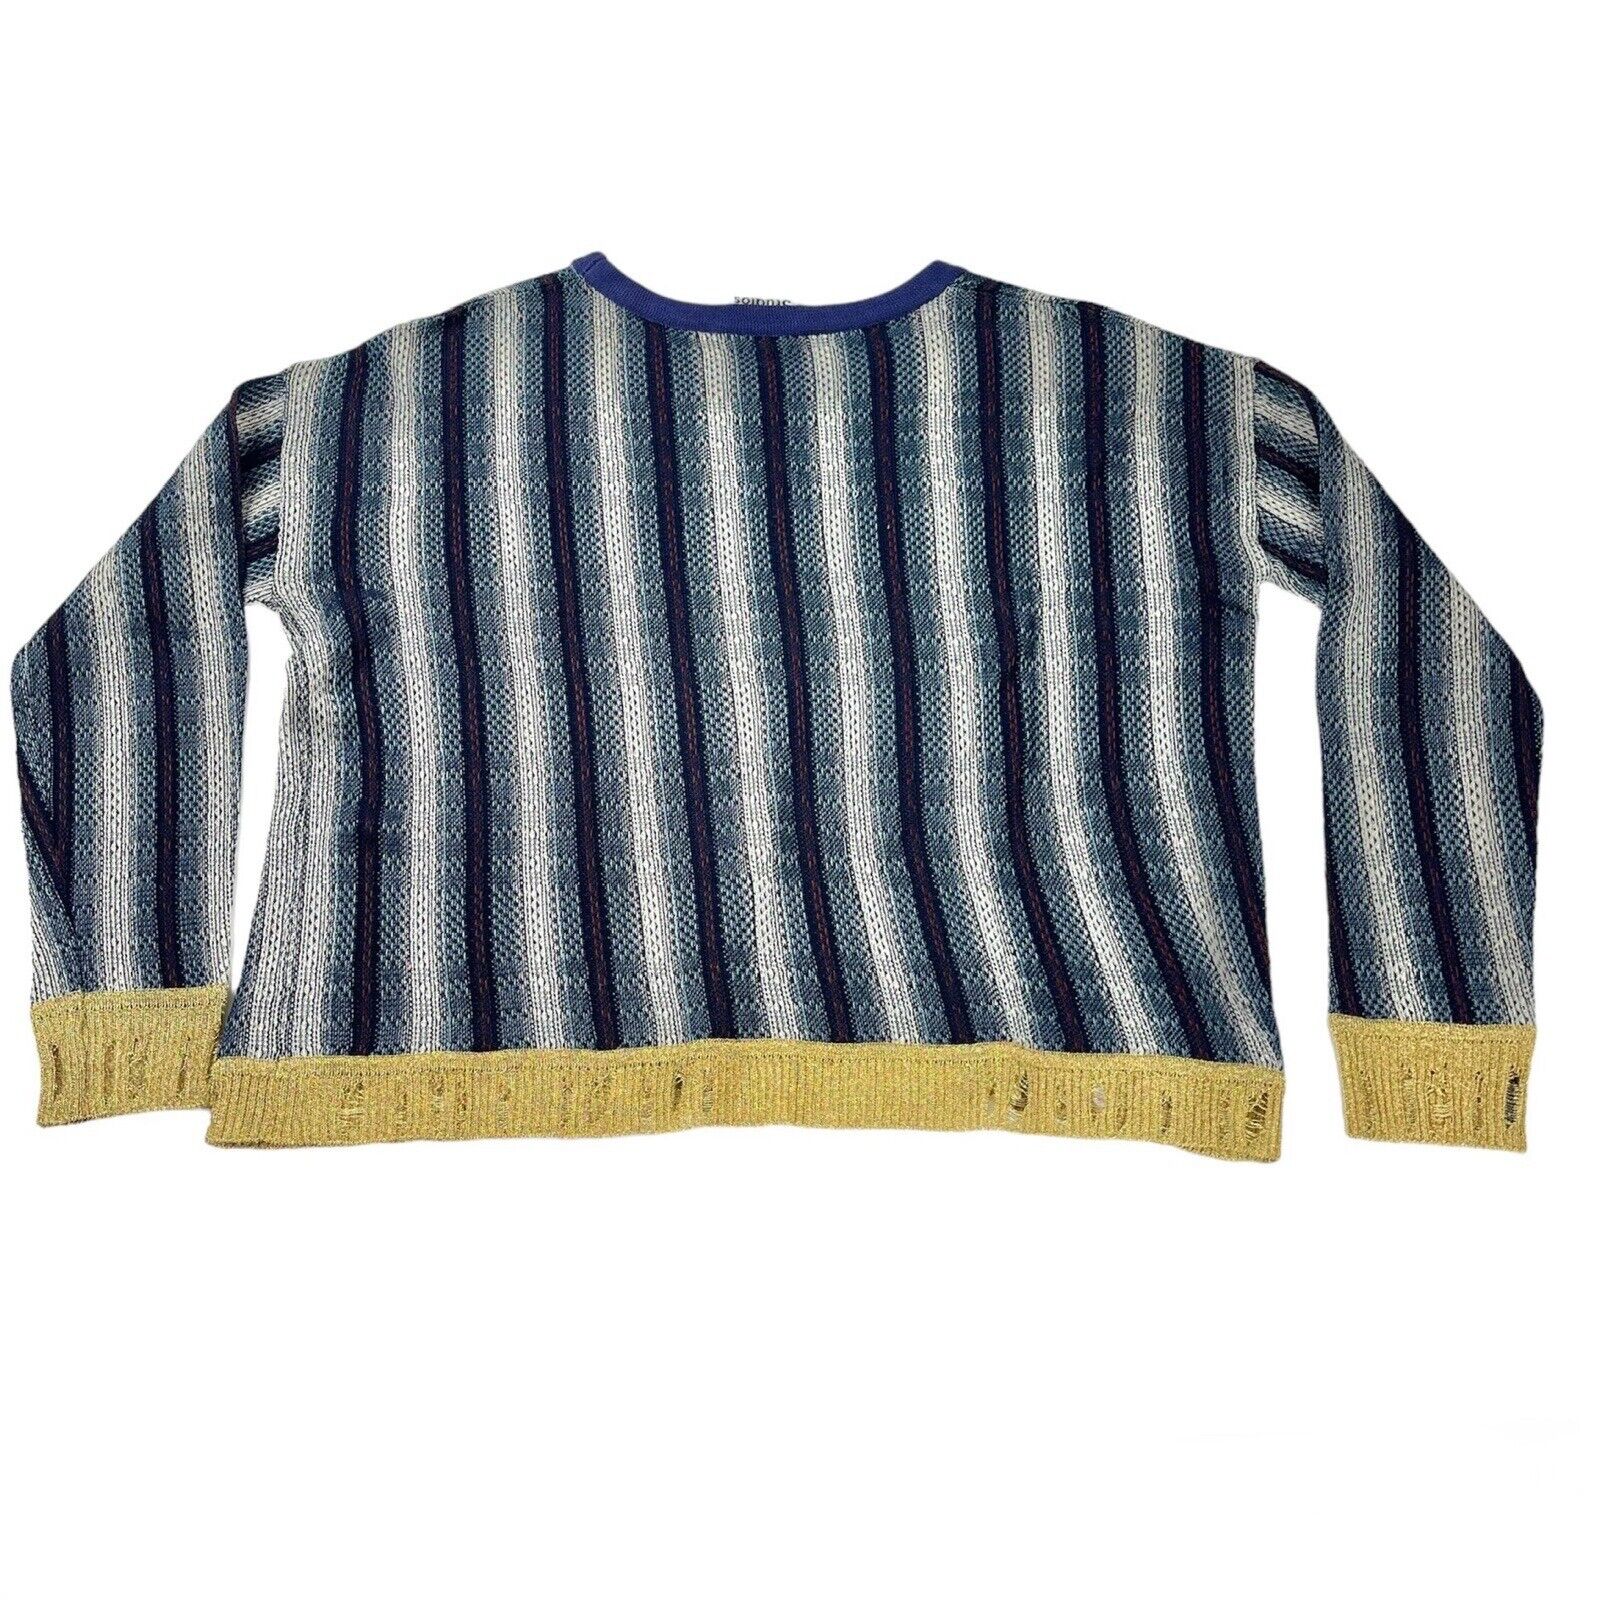 Acne Studios Cropped Knit Sweater Size S Blue Gold - image 2